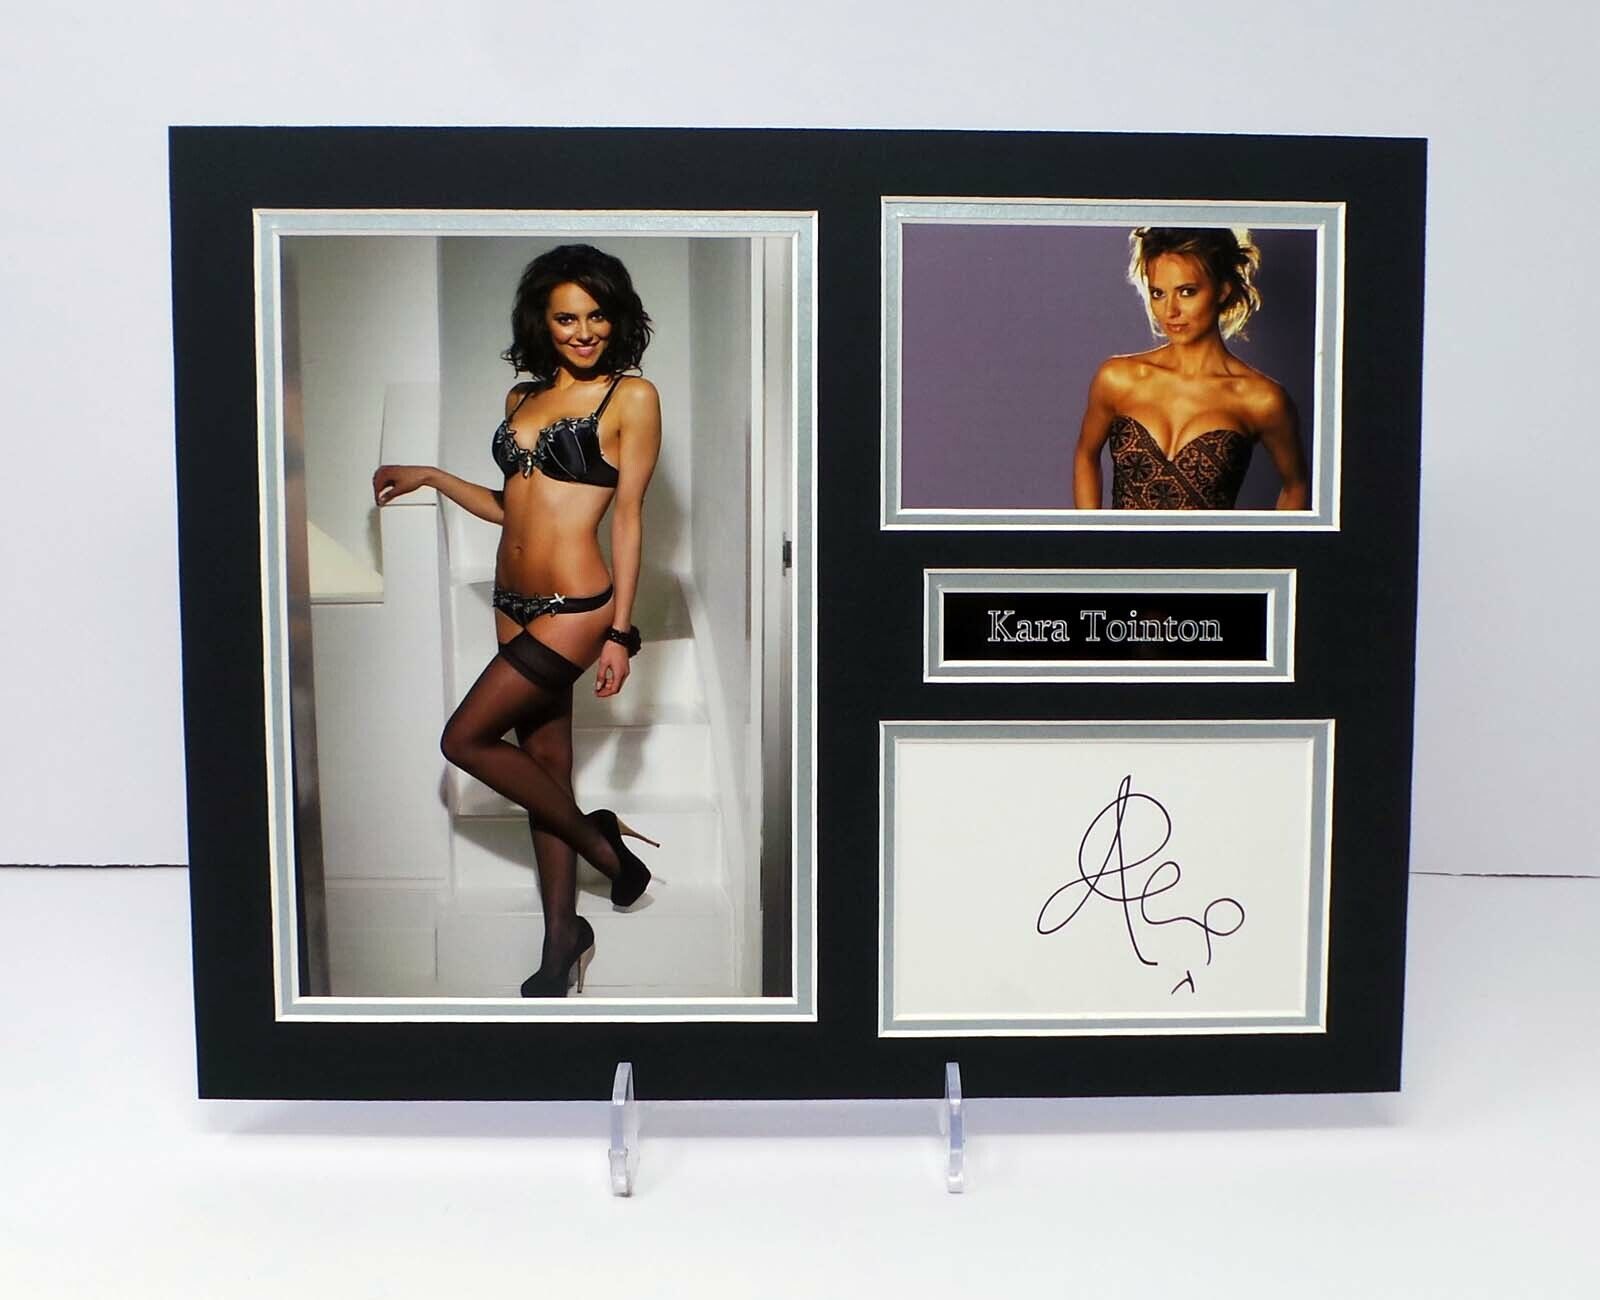 Kara TOINTON EastEnders Actress Sexy Signed Mounted Photo Poster painting Display AFTAL RD COA